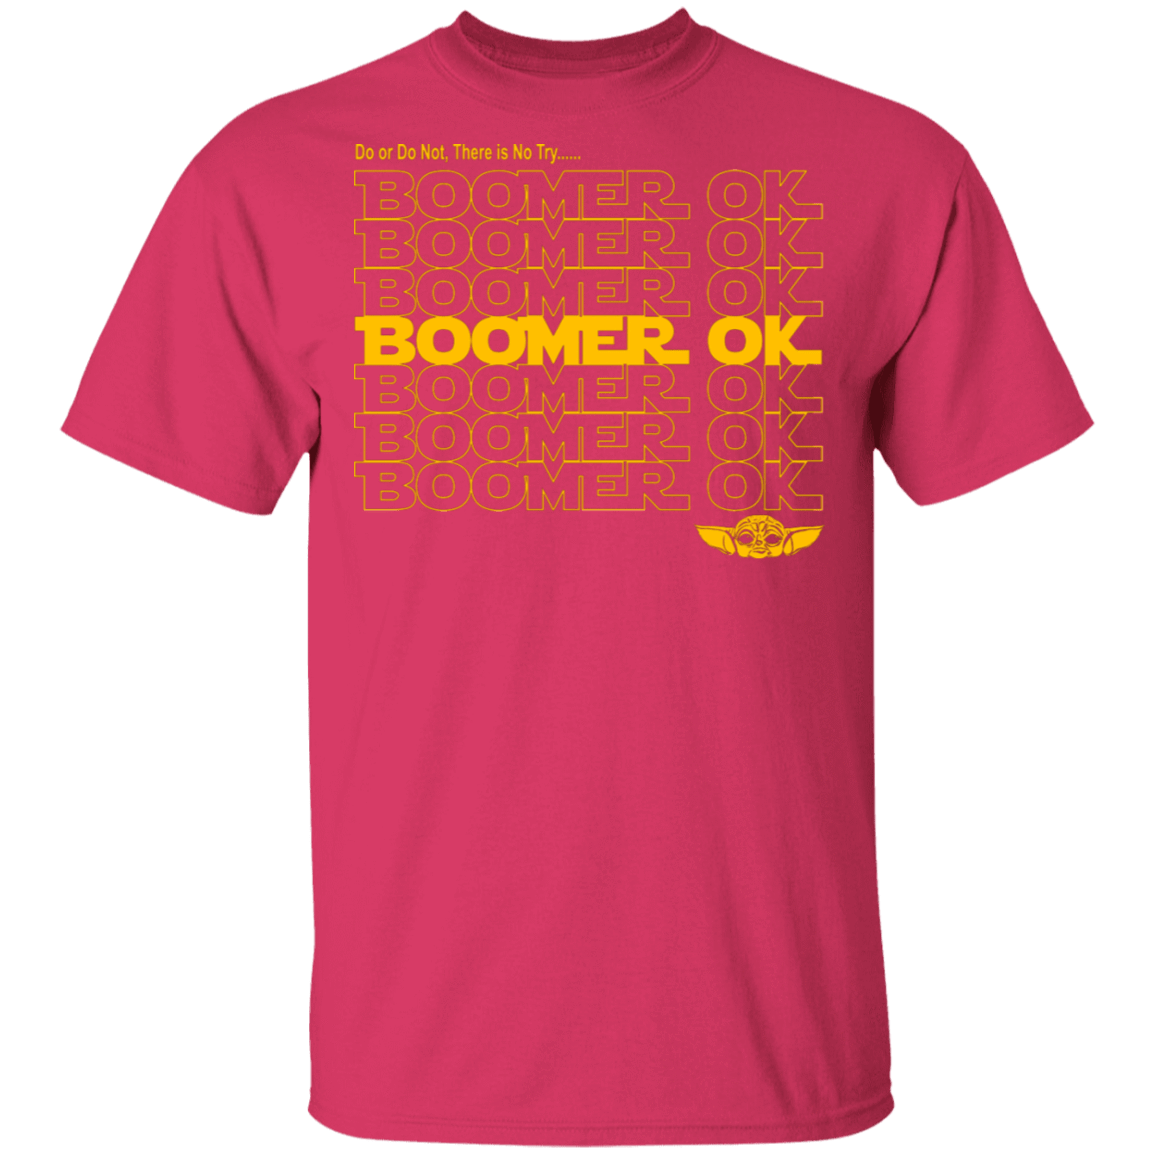 T-Shirts Heliconia / S Boomer OK T-Shirt